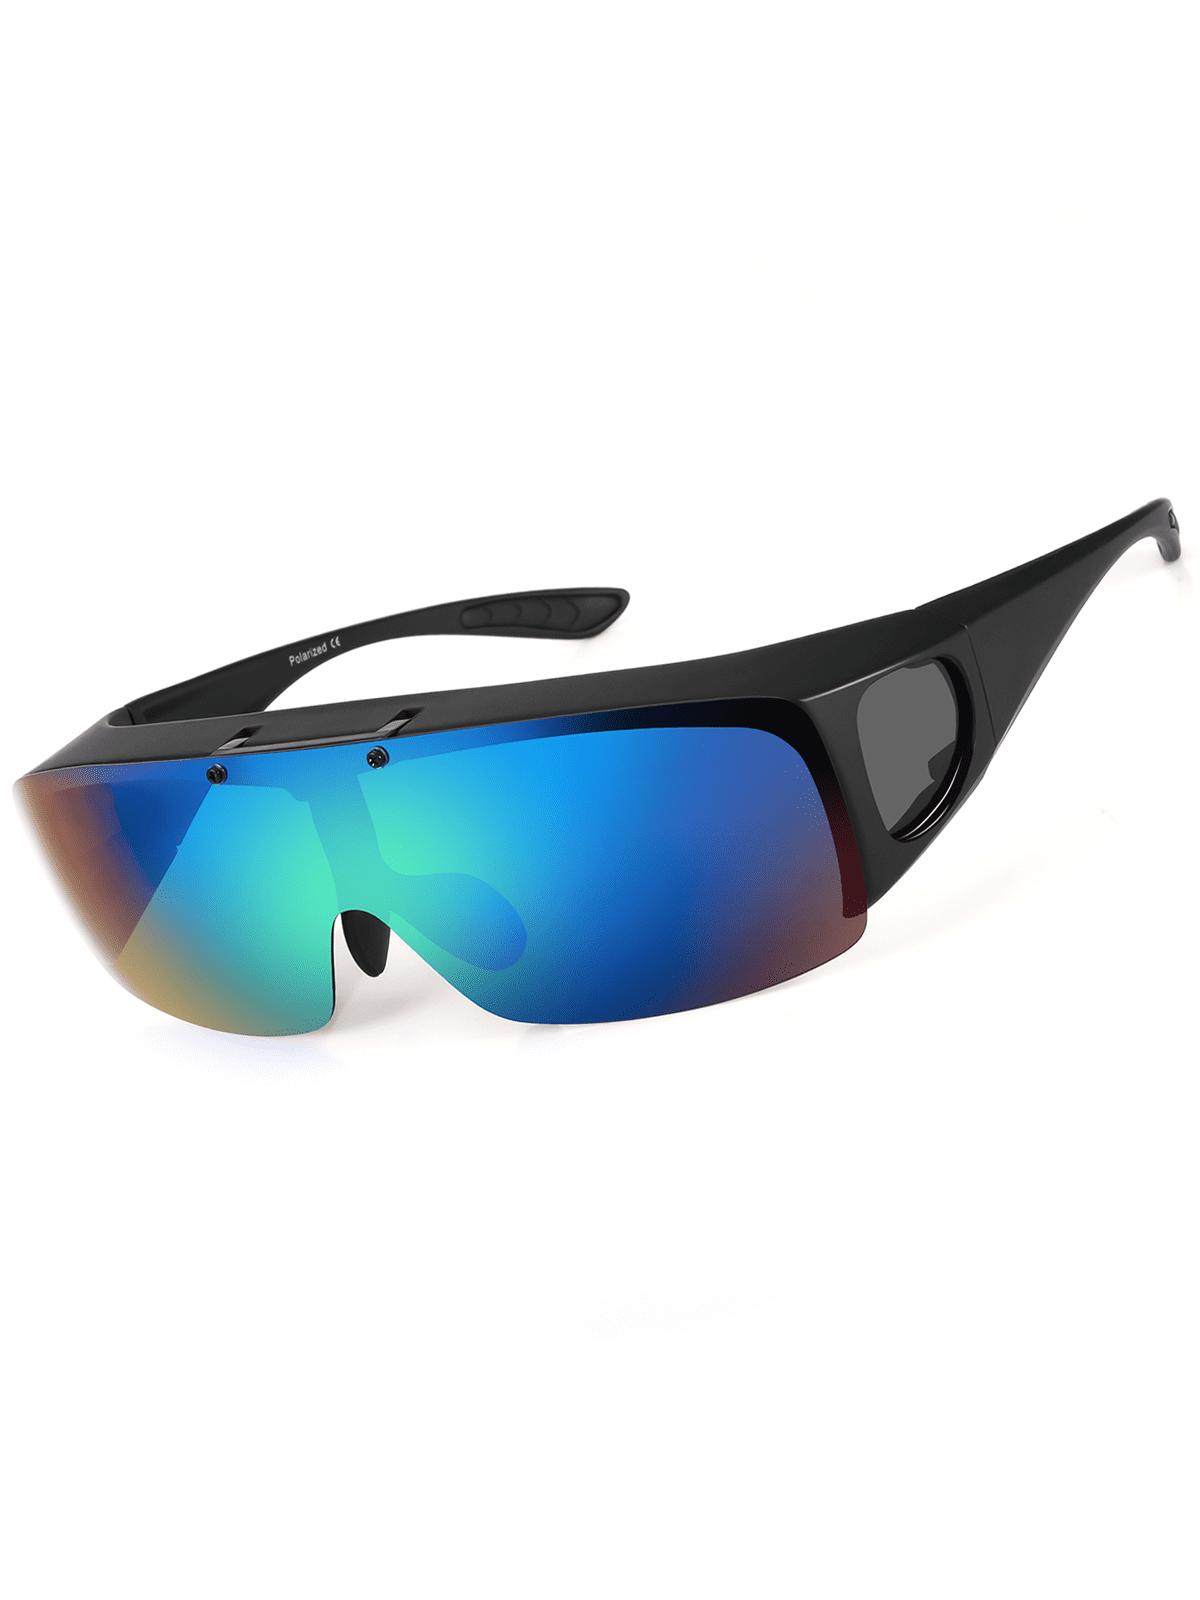 TINHAO Mens Polarized Fit Over Sunglasses Wear Over Glasses with Flip Up UV  Protection Lens for Driving Fishing 